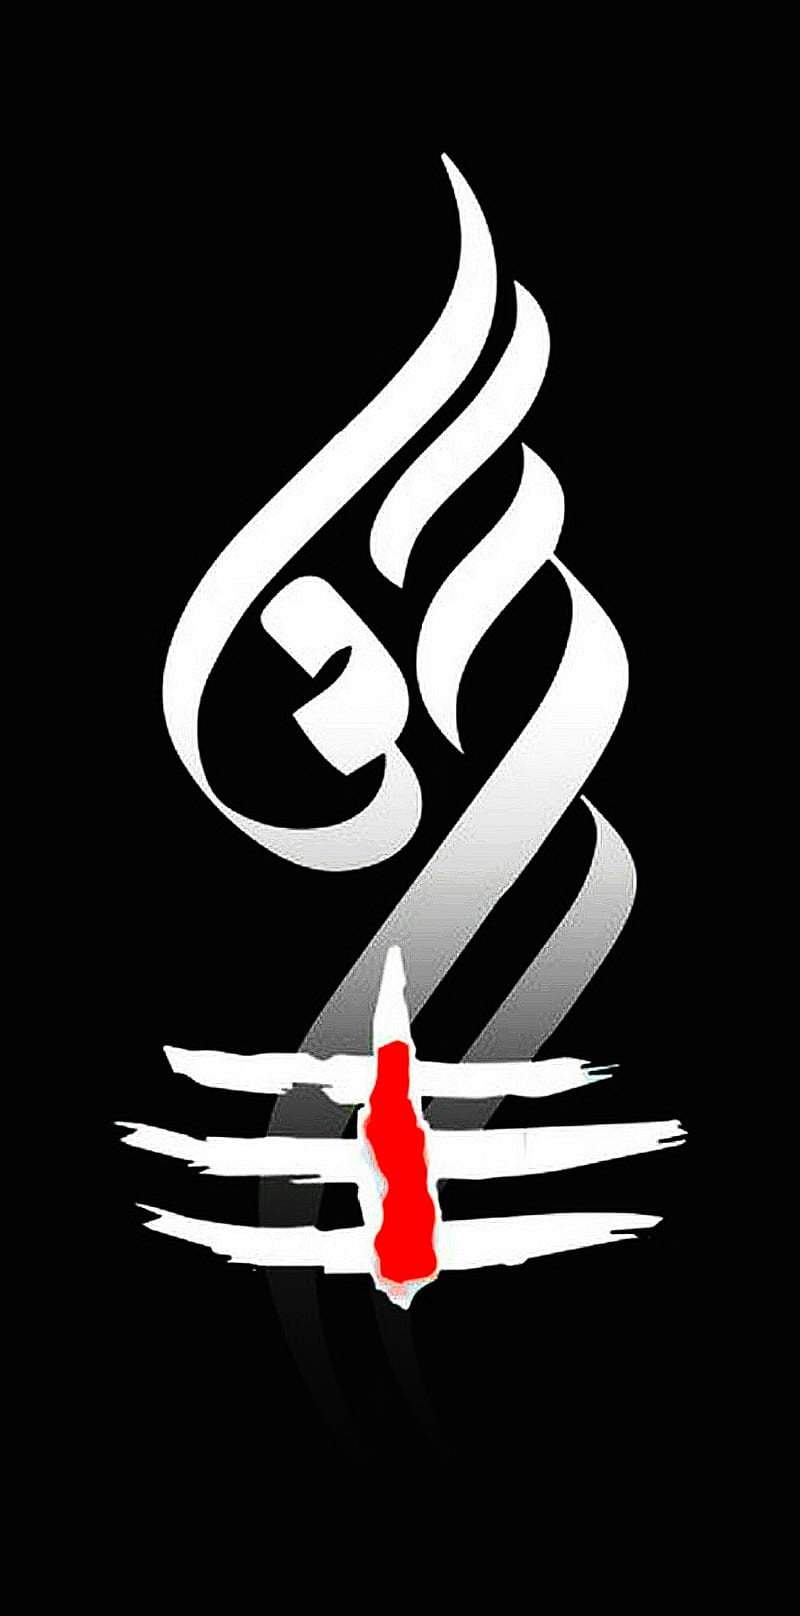 Share more than 153 shiv ling logo latest